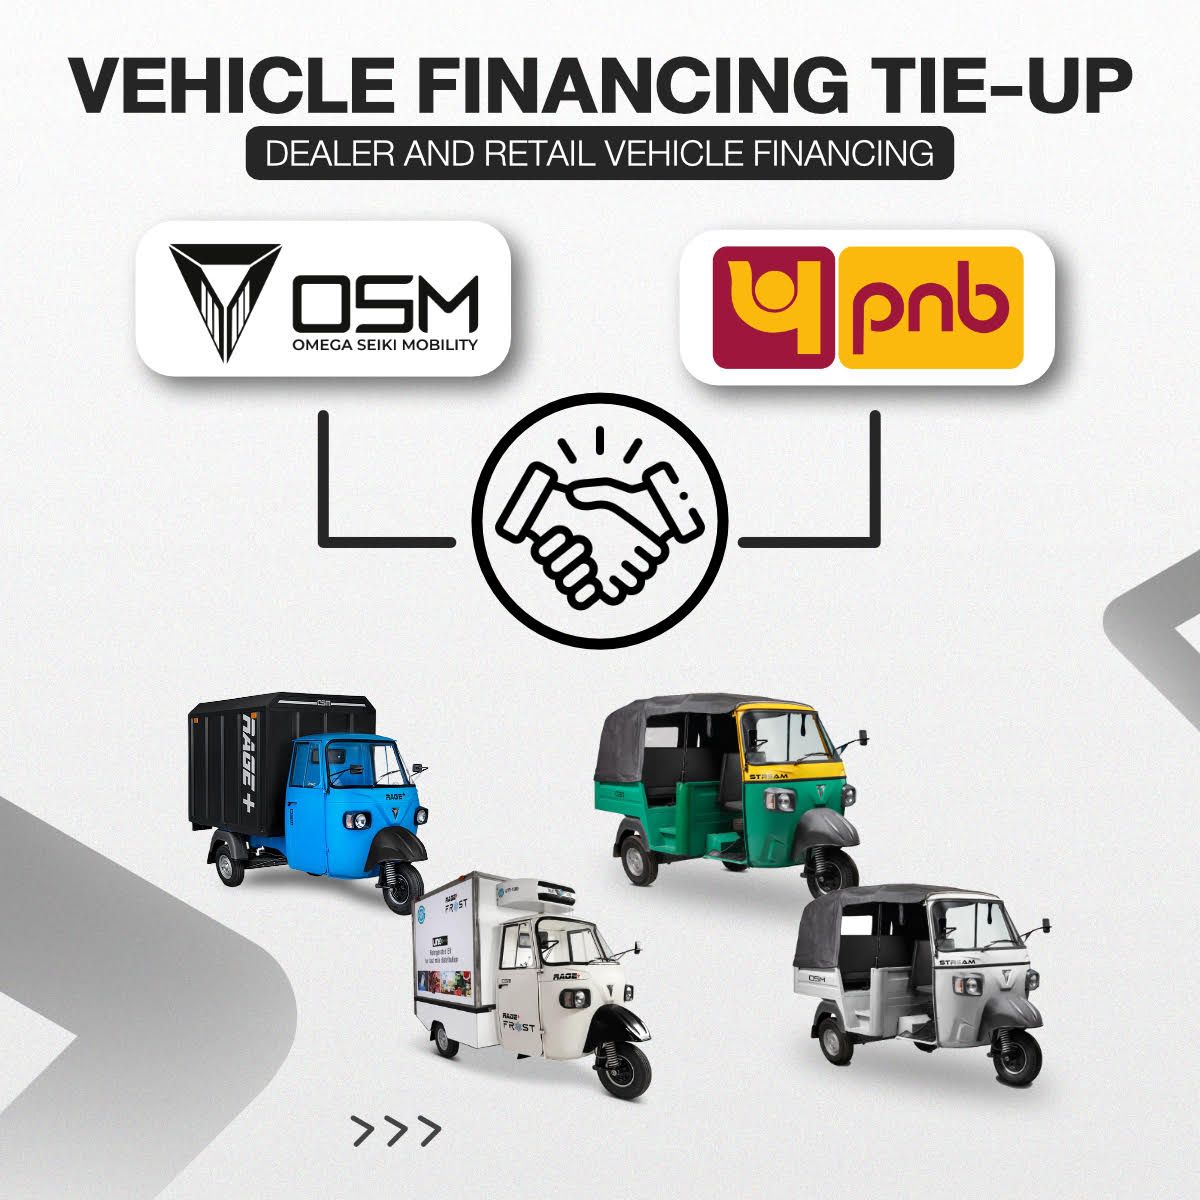 Omega Seiki Mobility has signed MoU with Punjab National Bank to expand financing options Tie-up for Dealers and Retail vehicle financing